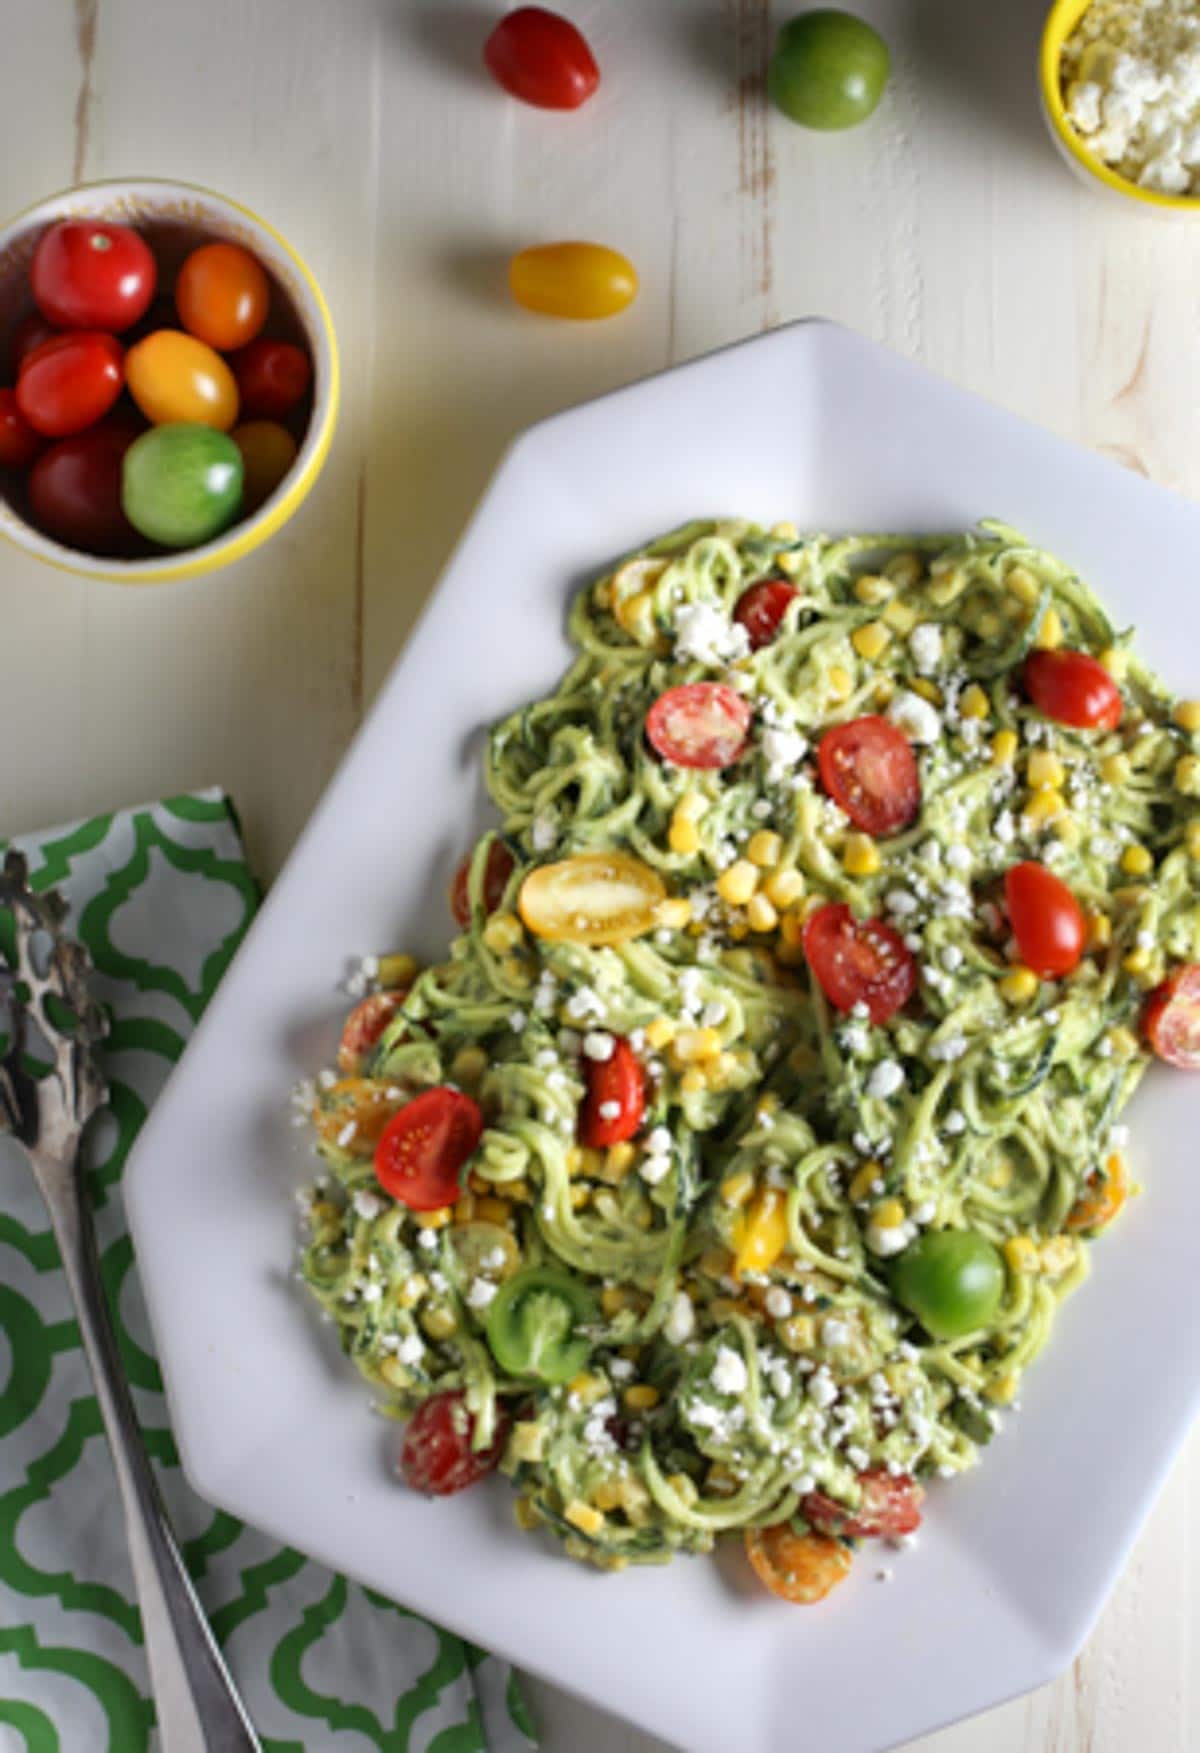 Zucchini Noodle Salad with Tomatoes, Goat Cheese, Corn & Avocado Sauce | WorldofPastabilities.com | Healthy, fresh, and delicious noodles that will convince even the kids it is pasta! The avocado sauce is the star...perfect side for any grilled meats this spring and summer!